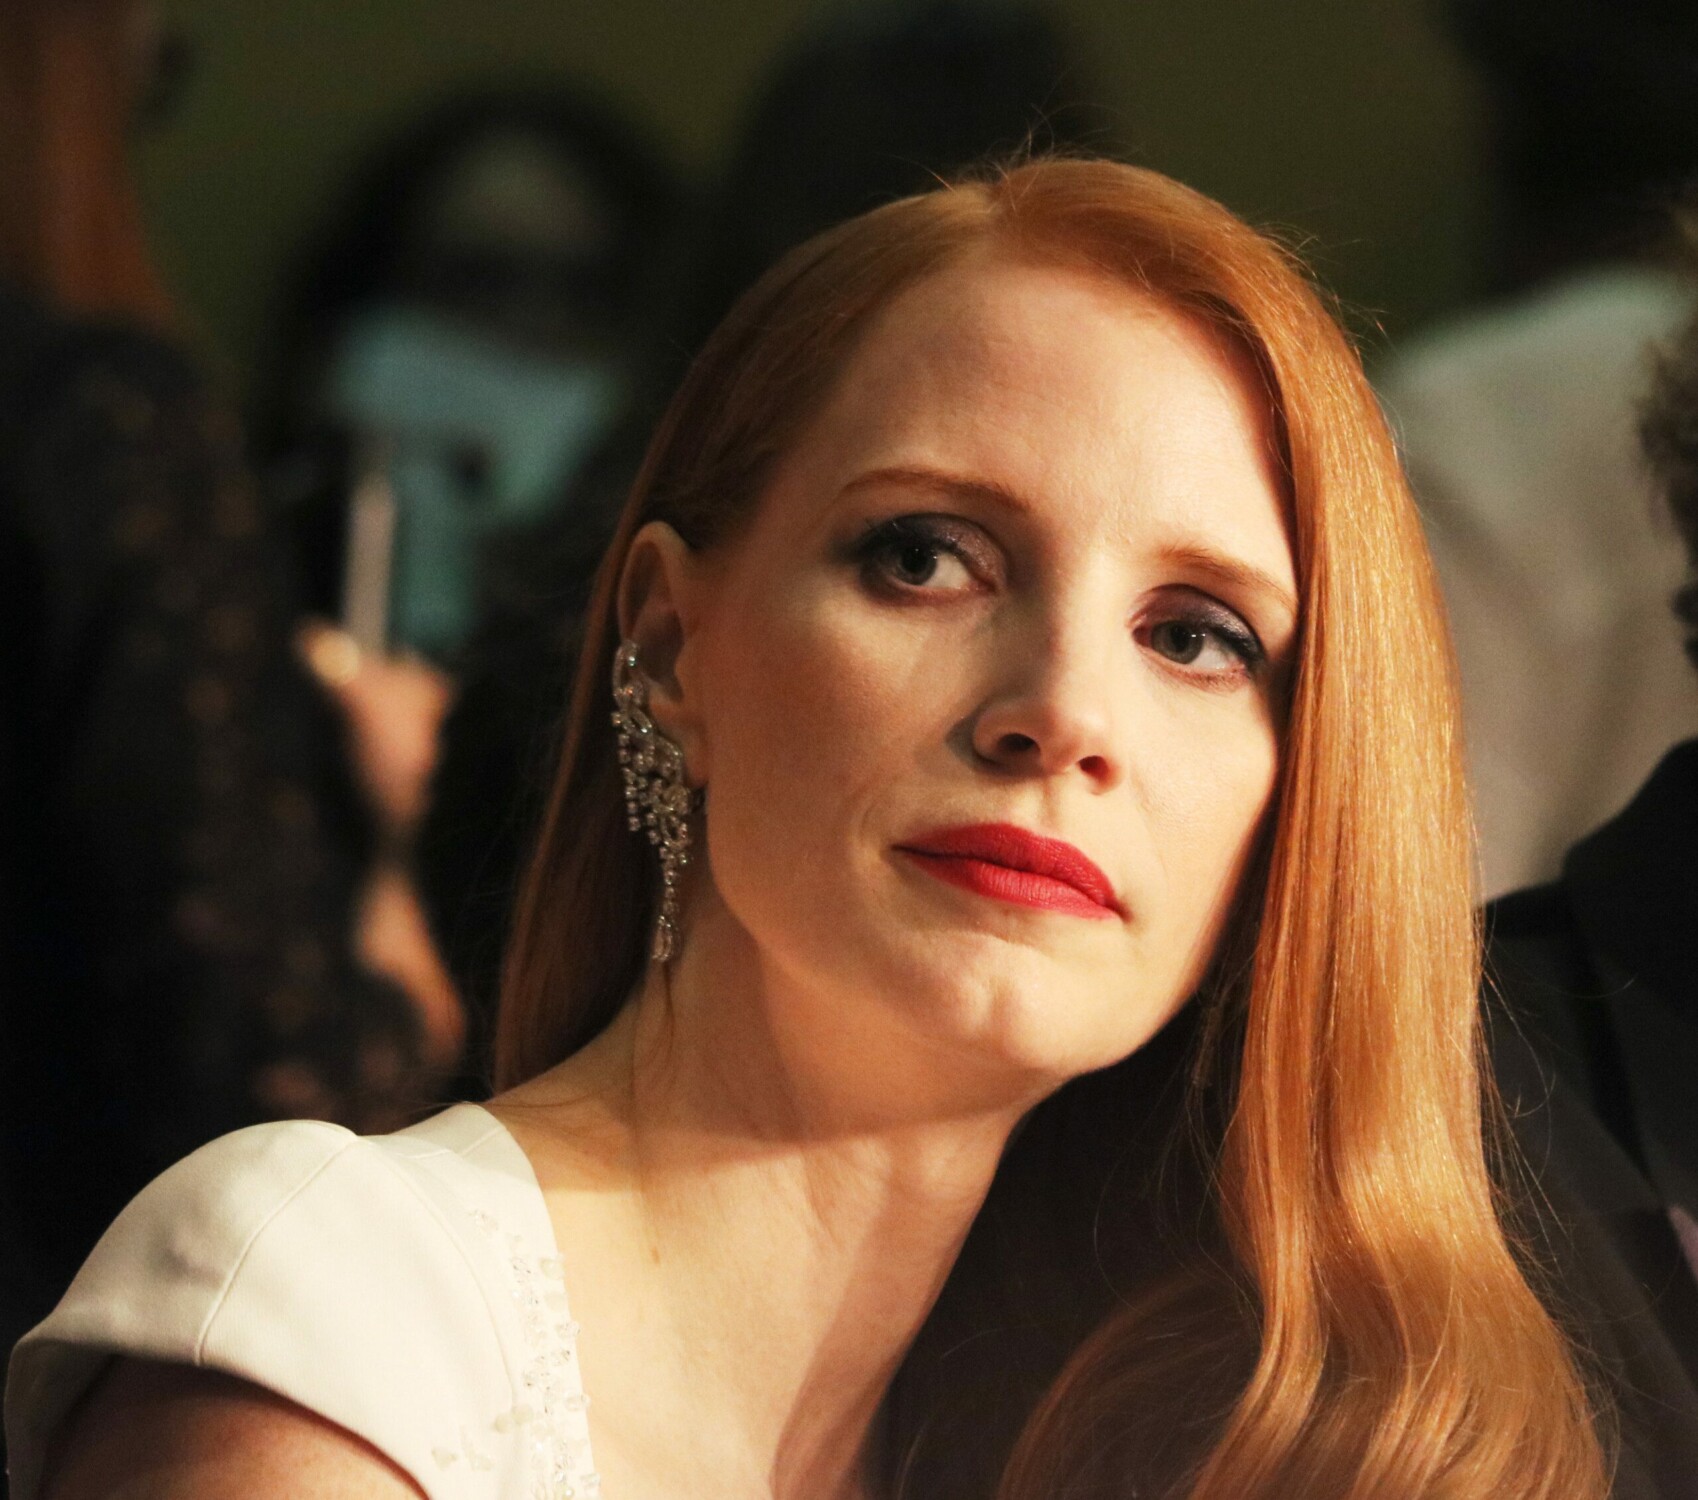 Jessica Chastain. De MisterHP7 - Trabajo propio, CC BY-SA 4.0, https://commons.wikimedia.org/w/index.php?curid=64364888